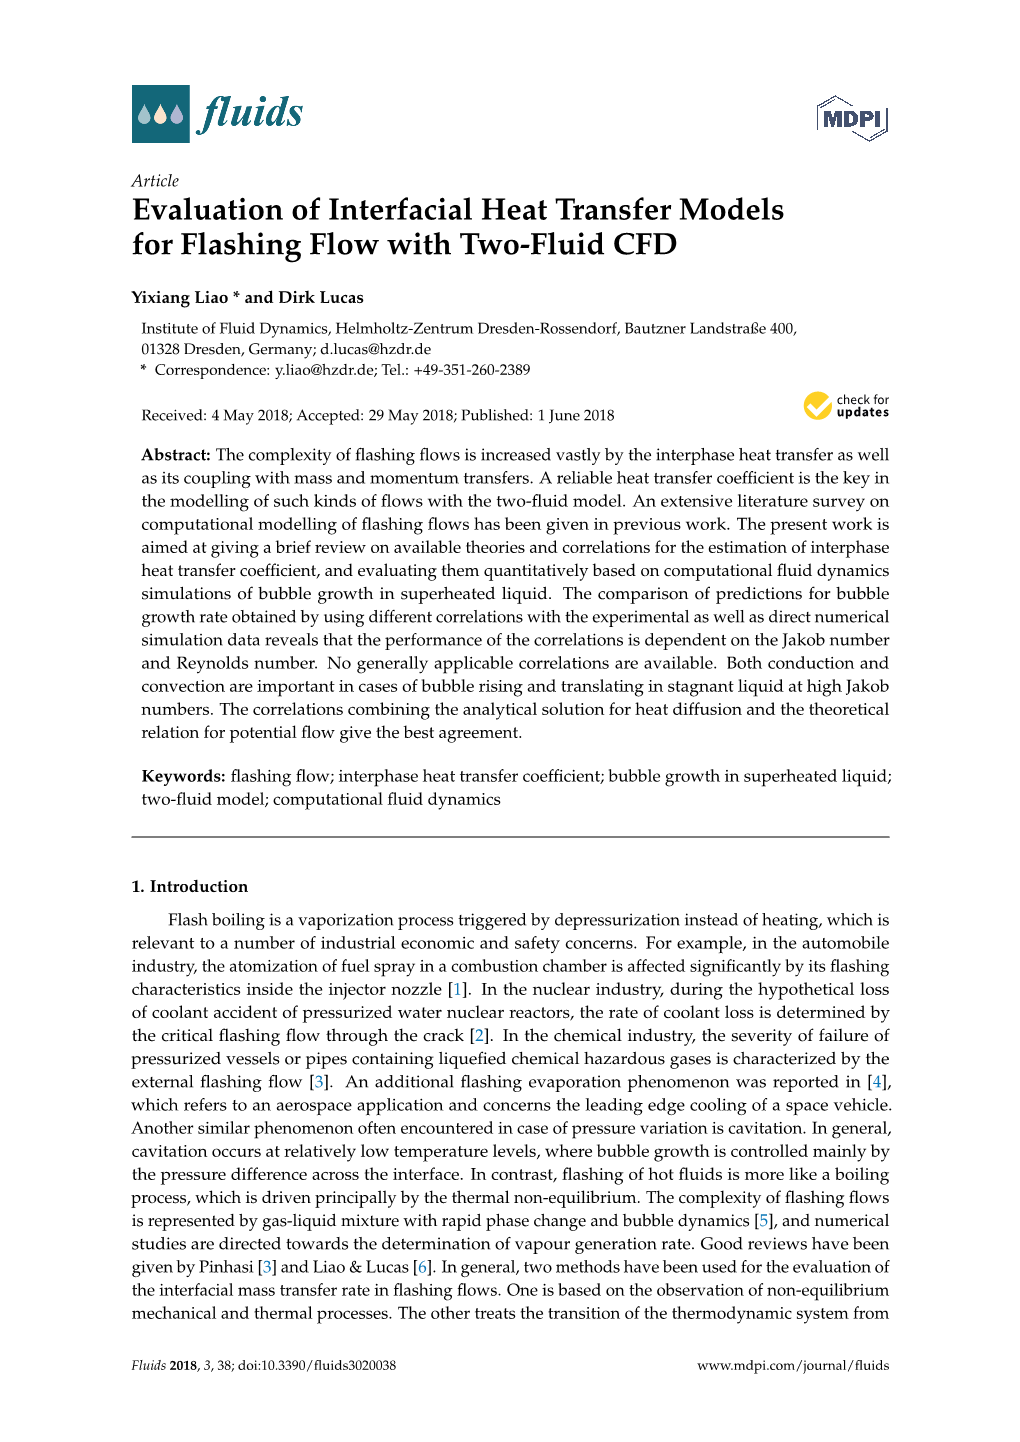 Evaluation of Interfacial Heat Transfer Models for Flashing Flow with Two-Fluid CFD